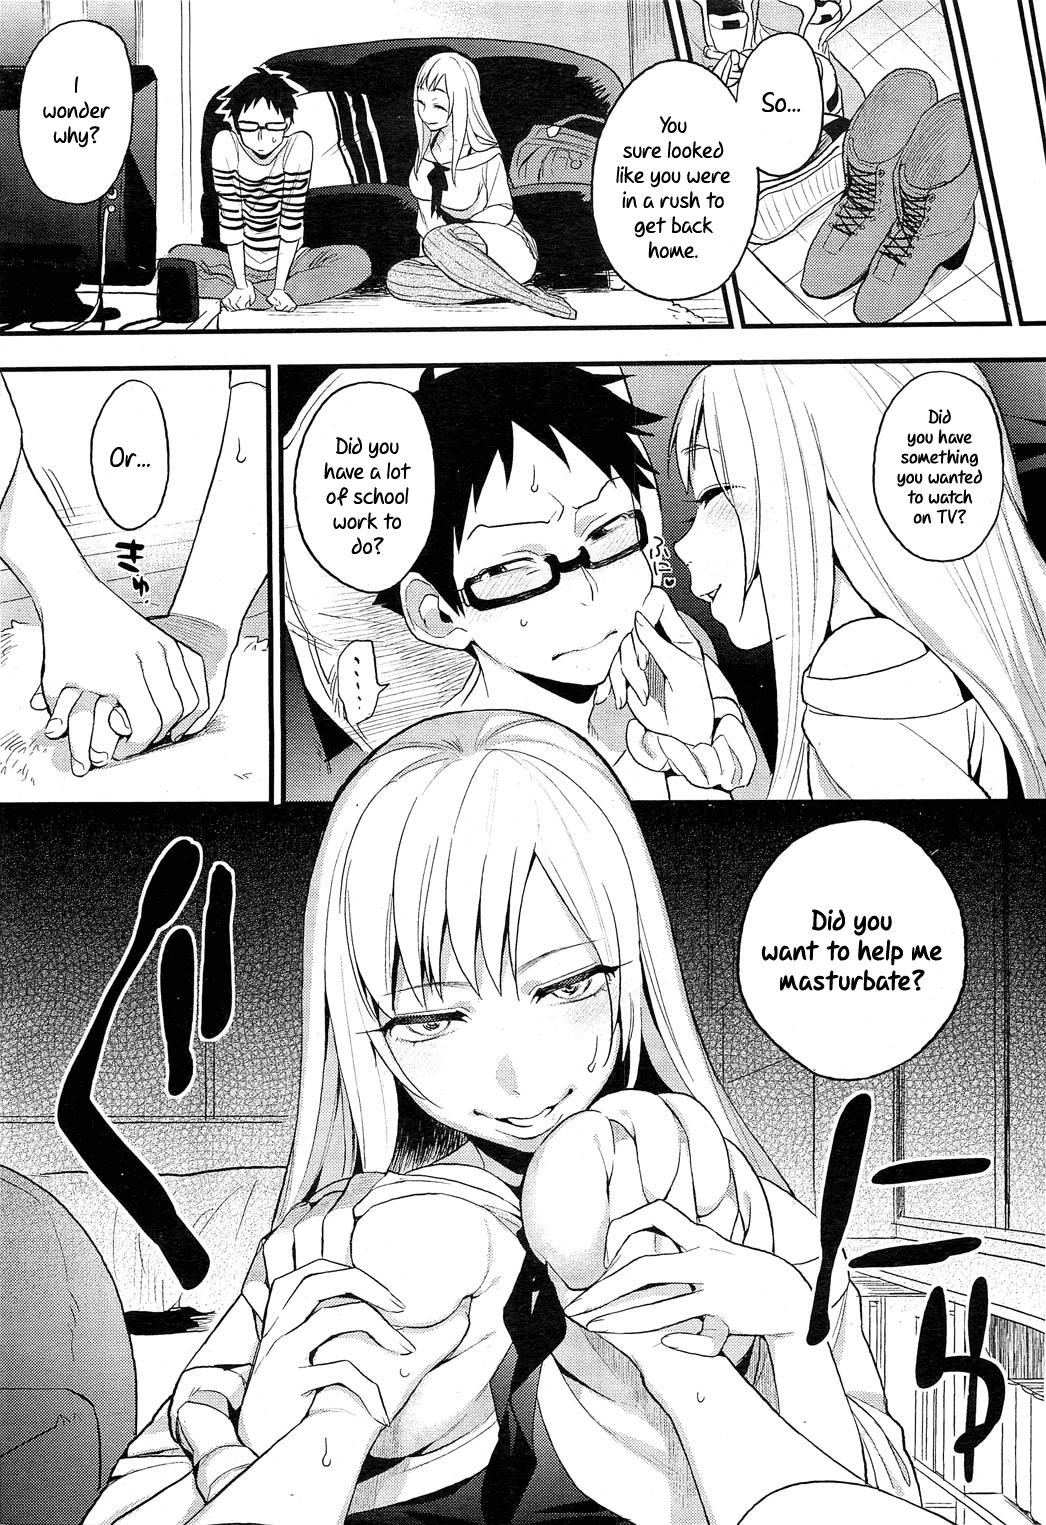 [Igumox] Omocha-kun to Onee-san | A Young Lady And Her Little Toy (COMIC HOTMiLK 2012-12) [English] =LWB= 2